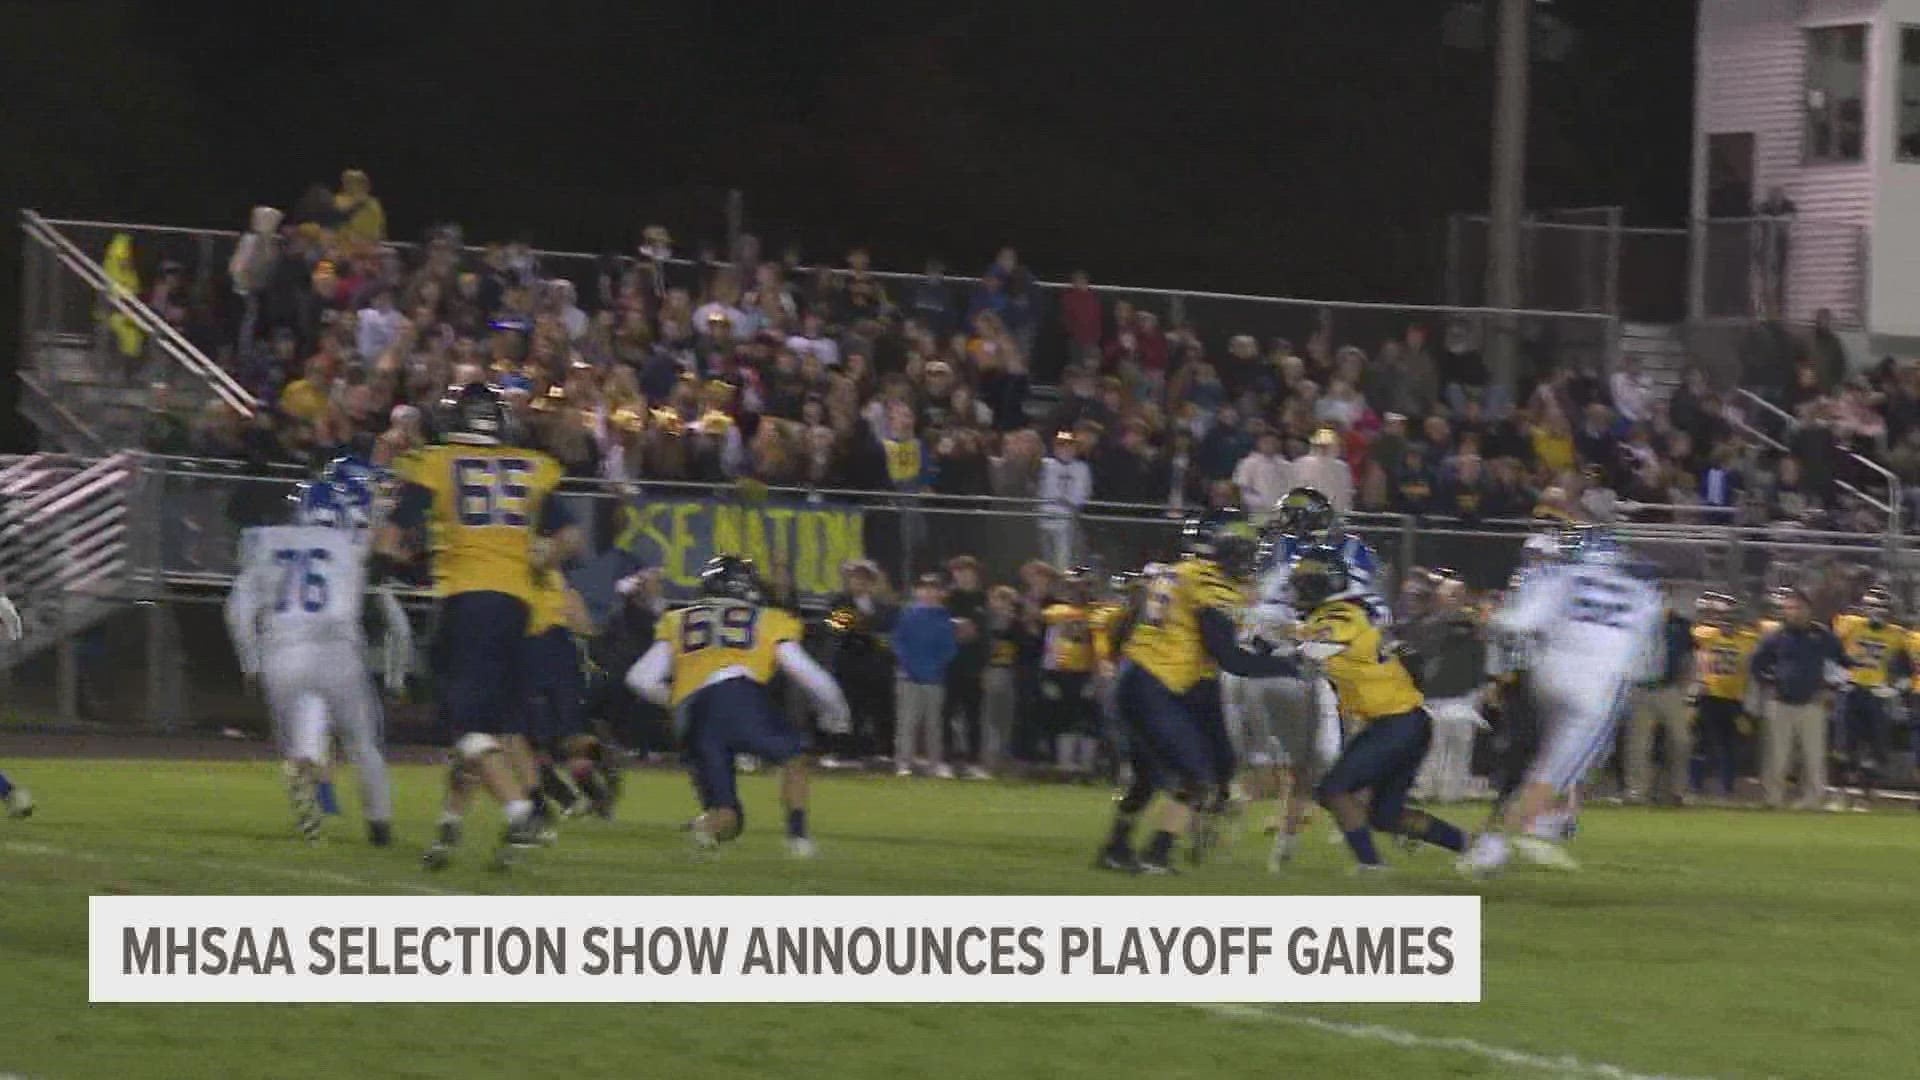 The high school football regular season is over, and we're finding out what schools will be playing each other in the MHSAA Selection Show.